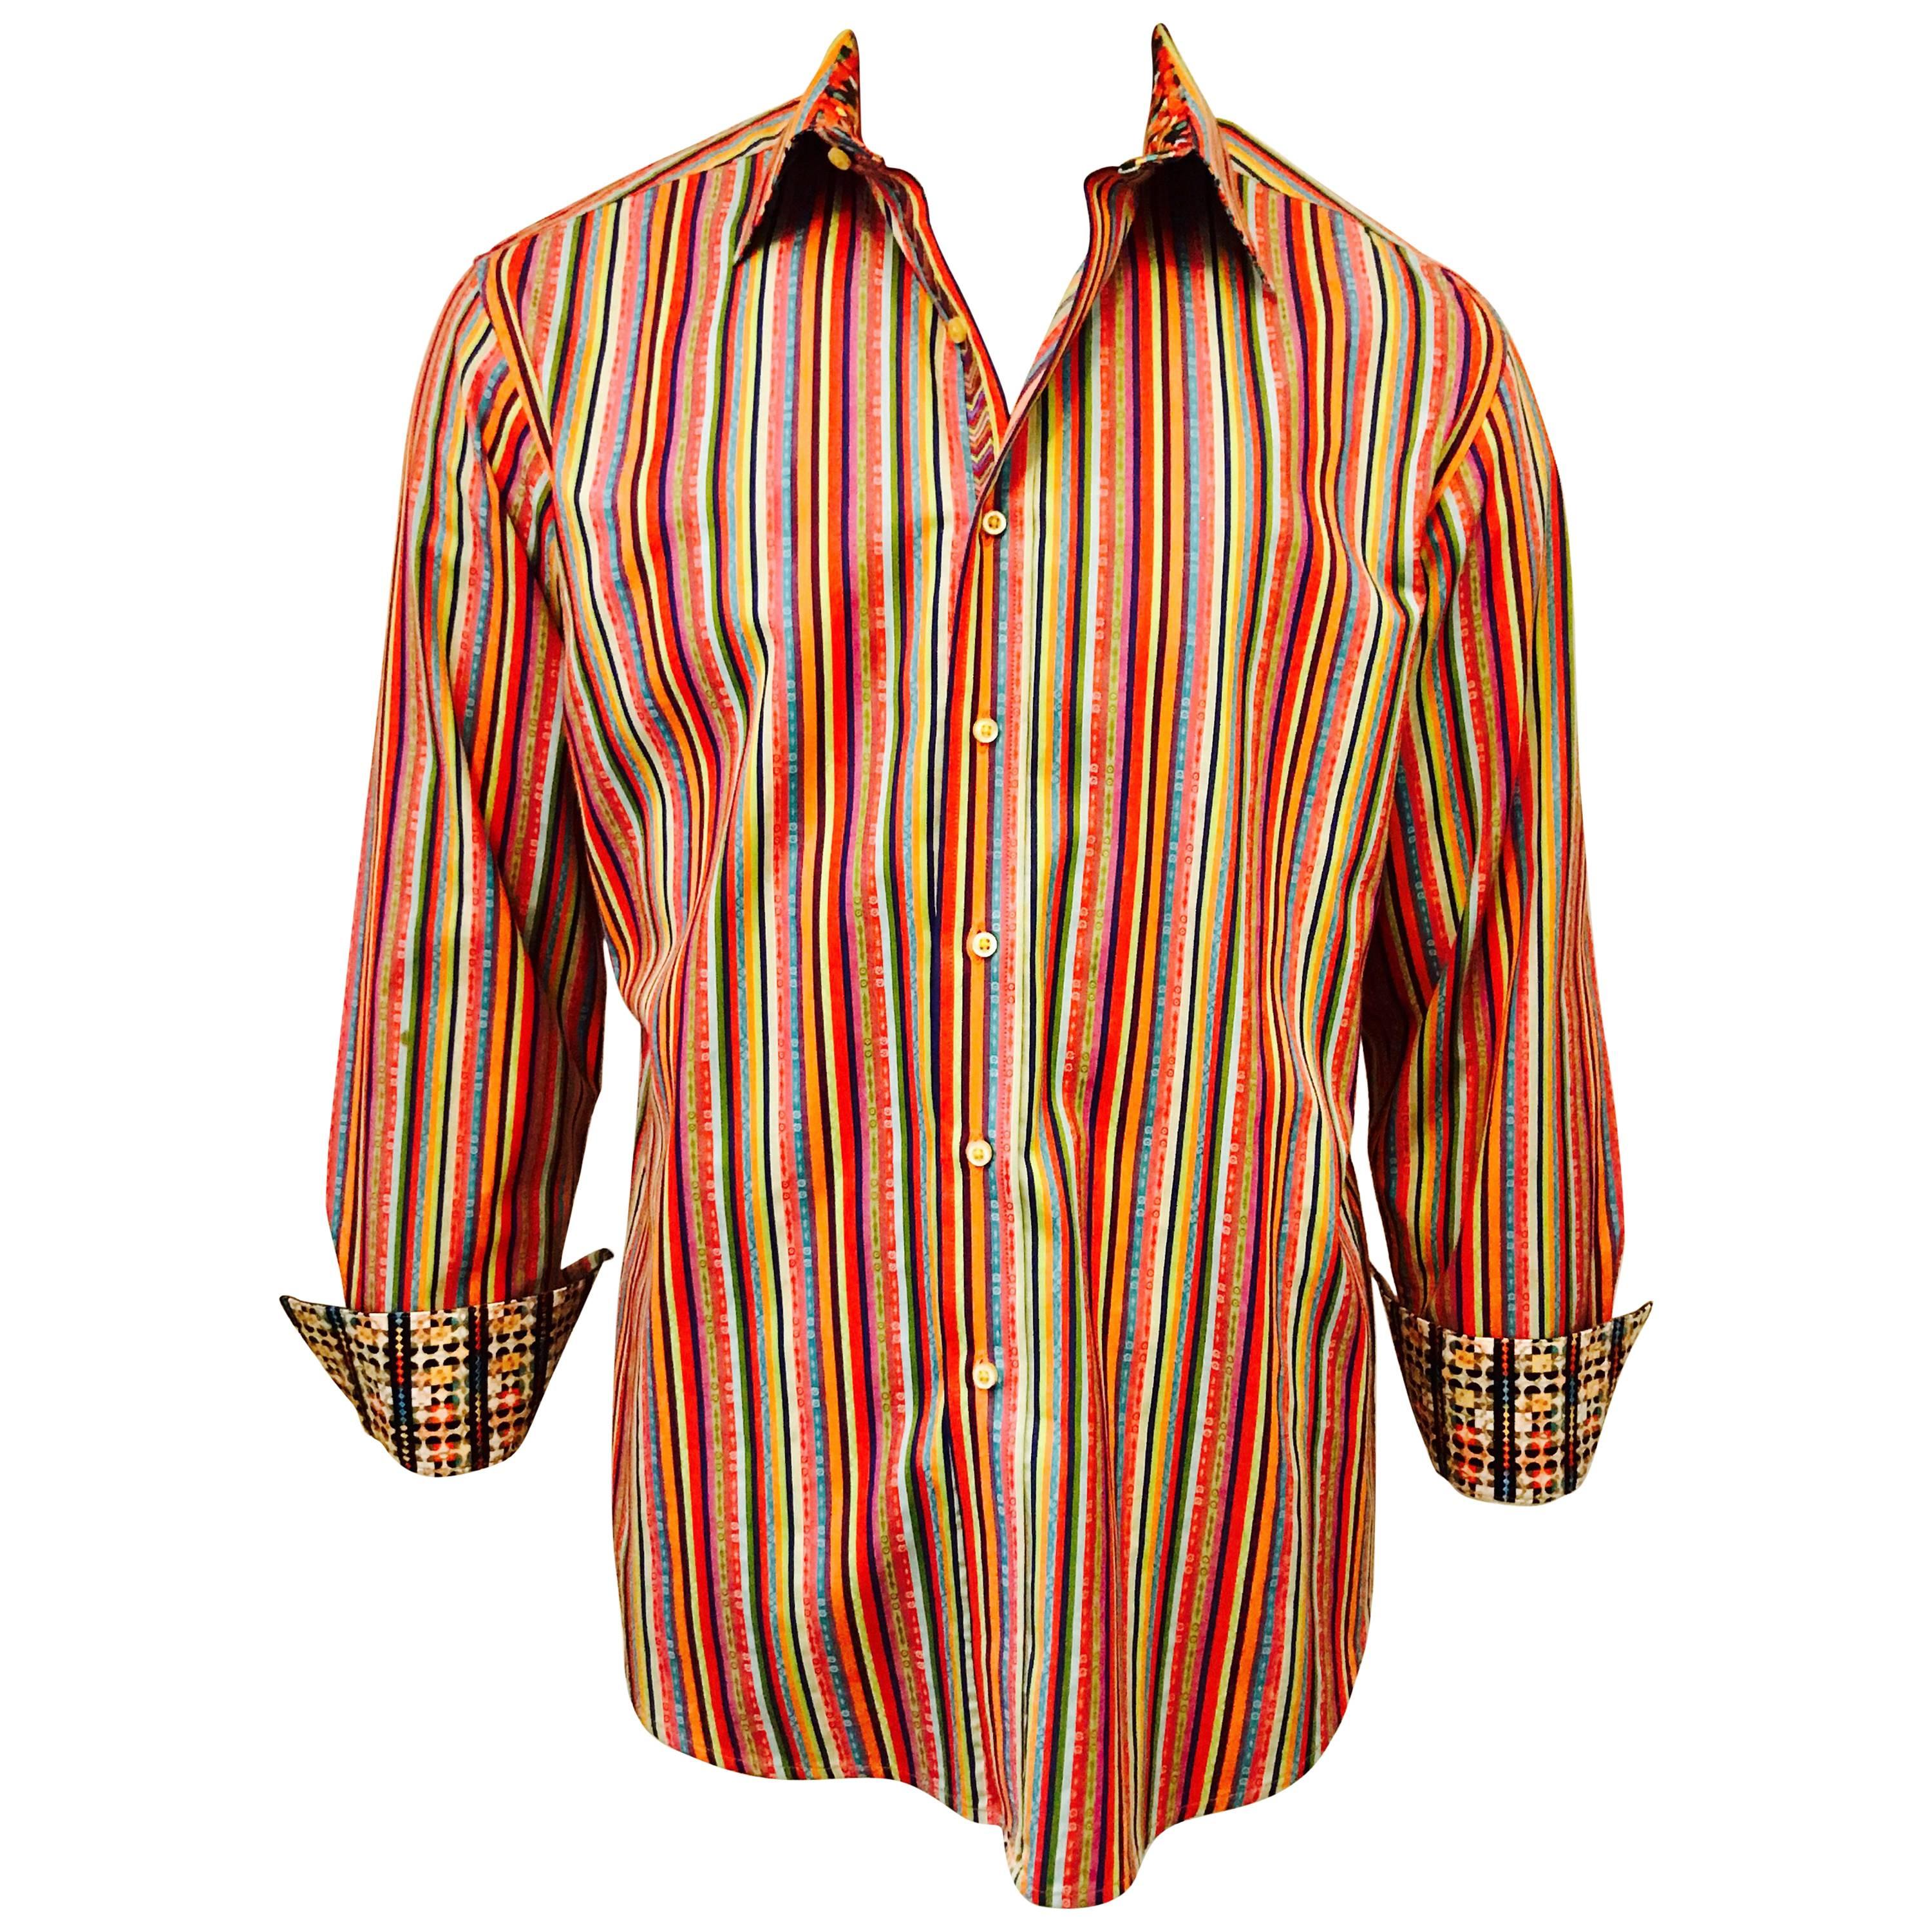 Men's Robert Graham Multi Colour Stripe Shirt with Contrast Cuff and Collar